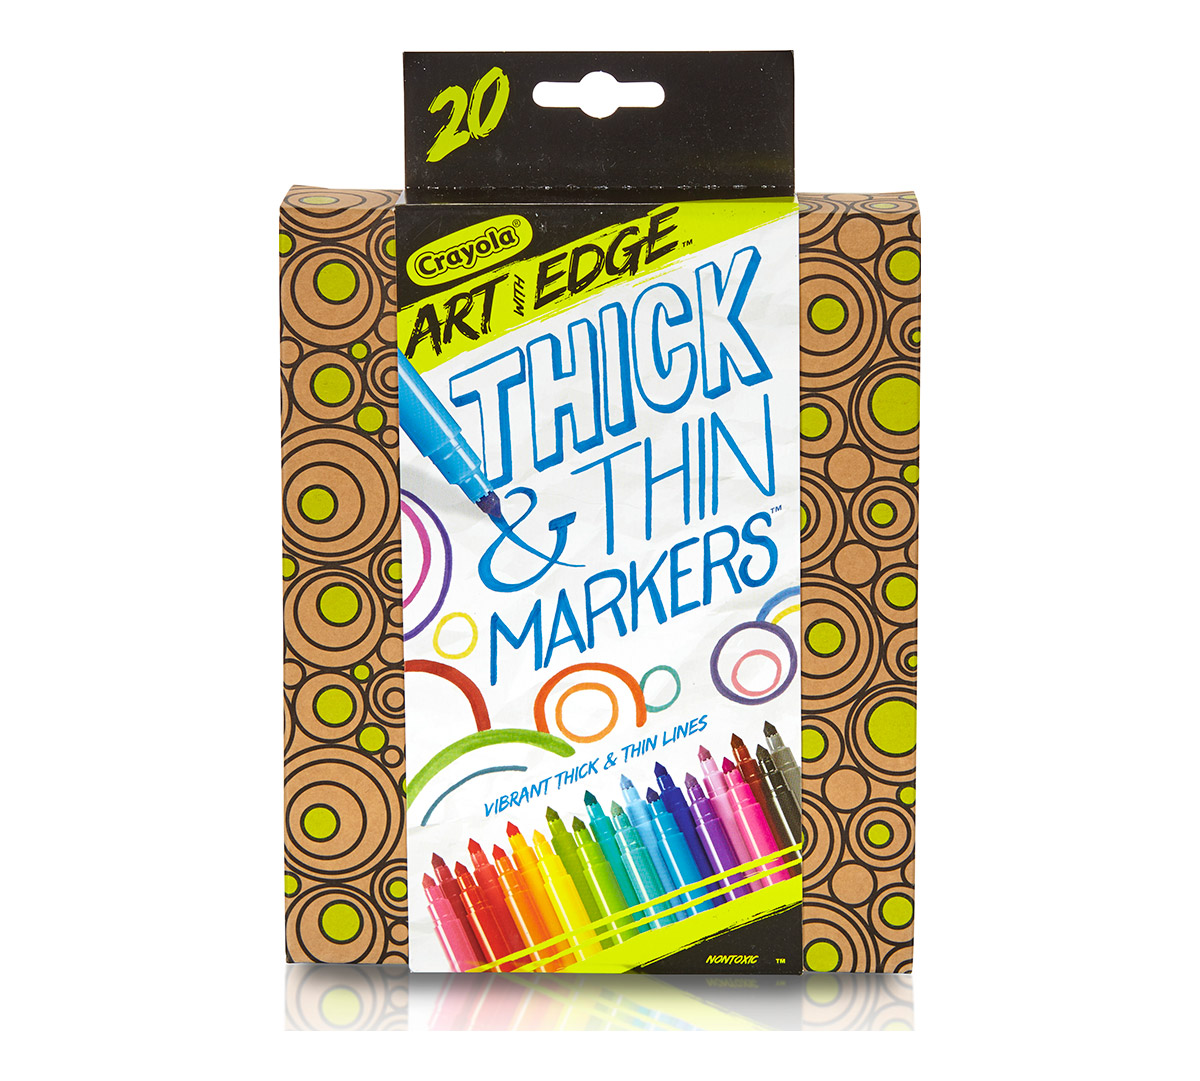 https://shop.crayola.com/on/demandware.static/-/Sites-crayola-storefront/default/dw56ff0c12/images/58-8187-0-250_Art-With-Edge_Thick-Thin-Markers_20ct_F1.jpg